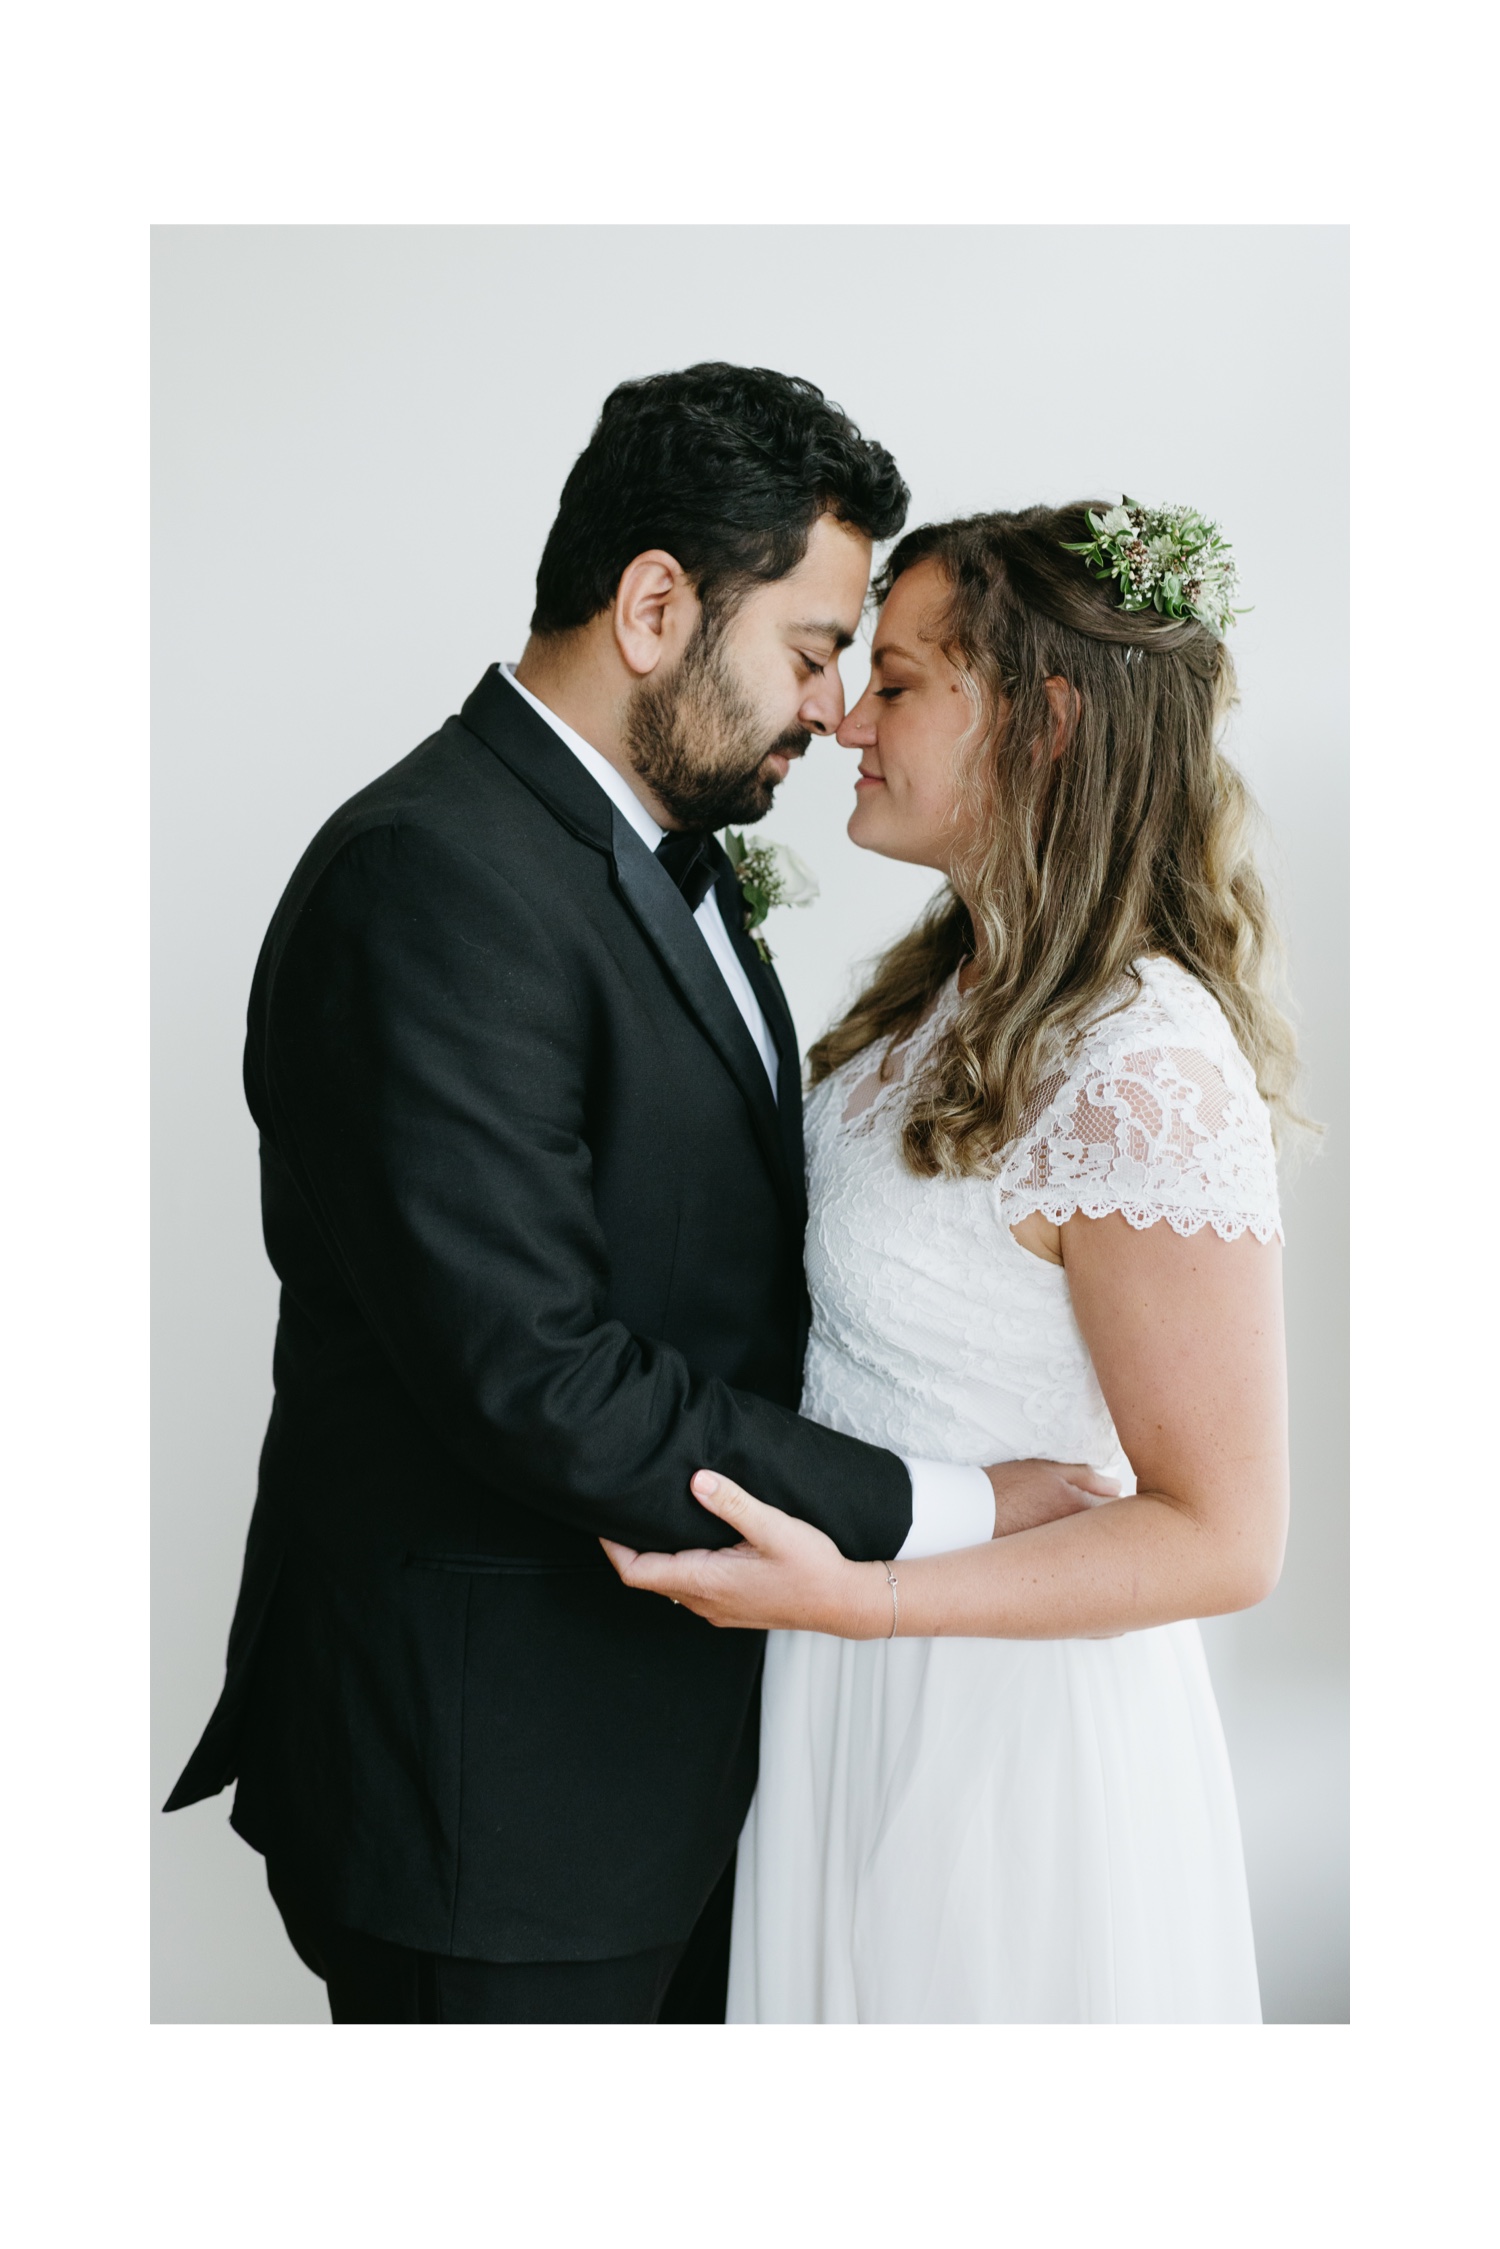 Rawlings Conservatory Baltimore Elopement bride and groom touching noses portrait